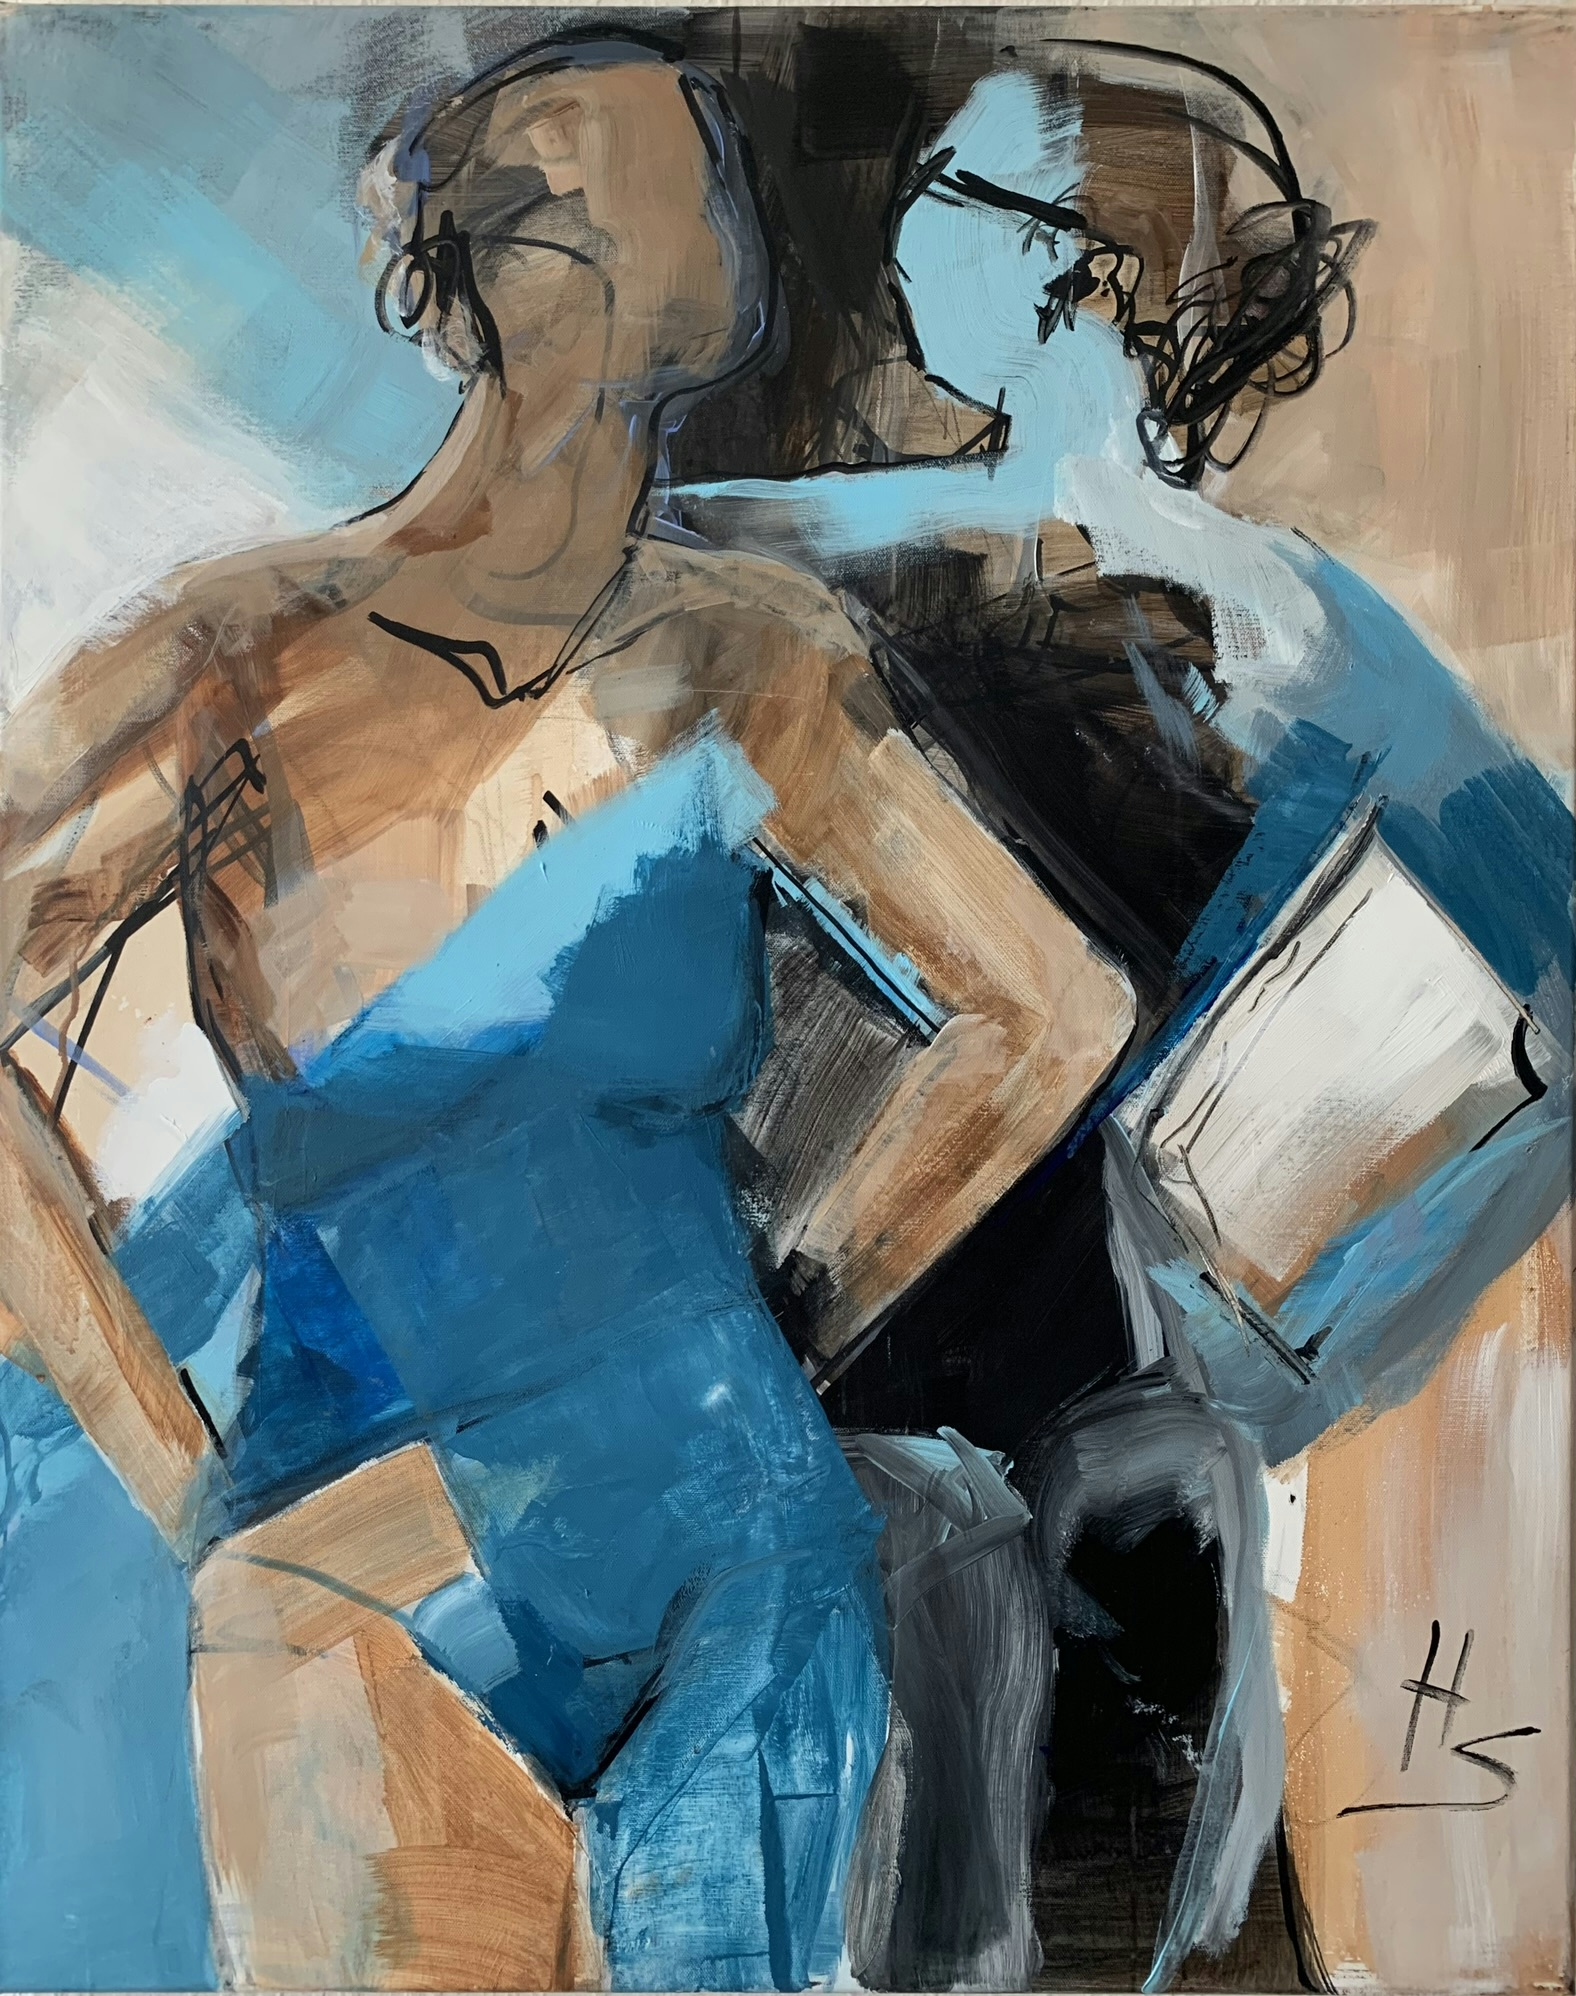 The artwork by Heike Schümann portrays two standing women, gazing at each other, with hands on their hips